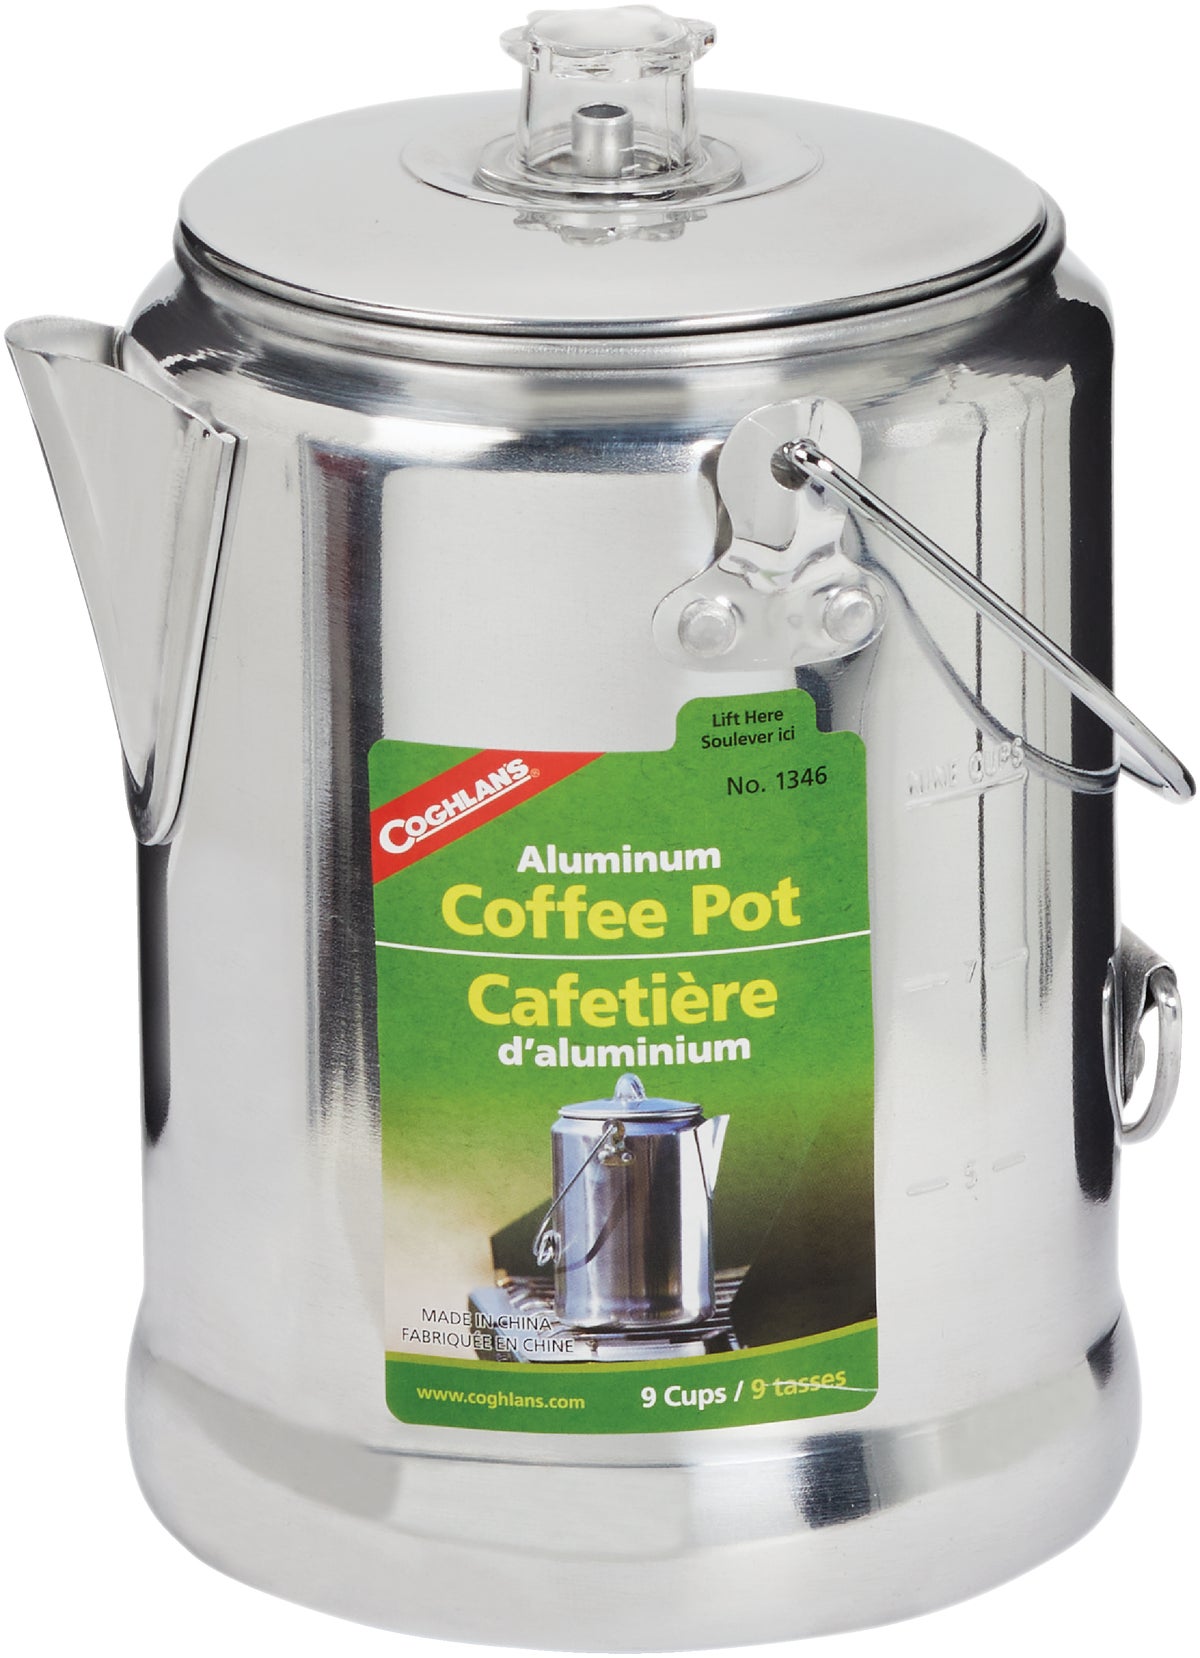 Camping Coffee, Camping Coffee Maker